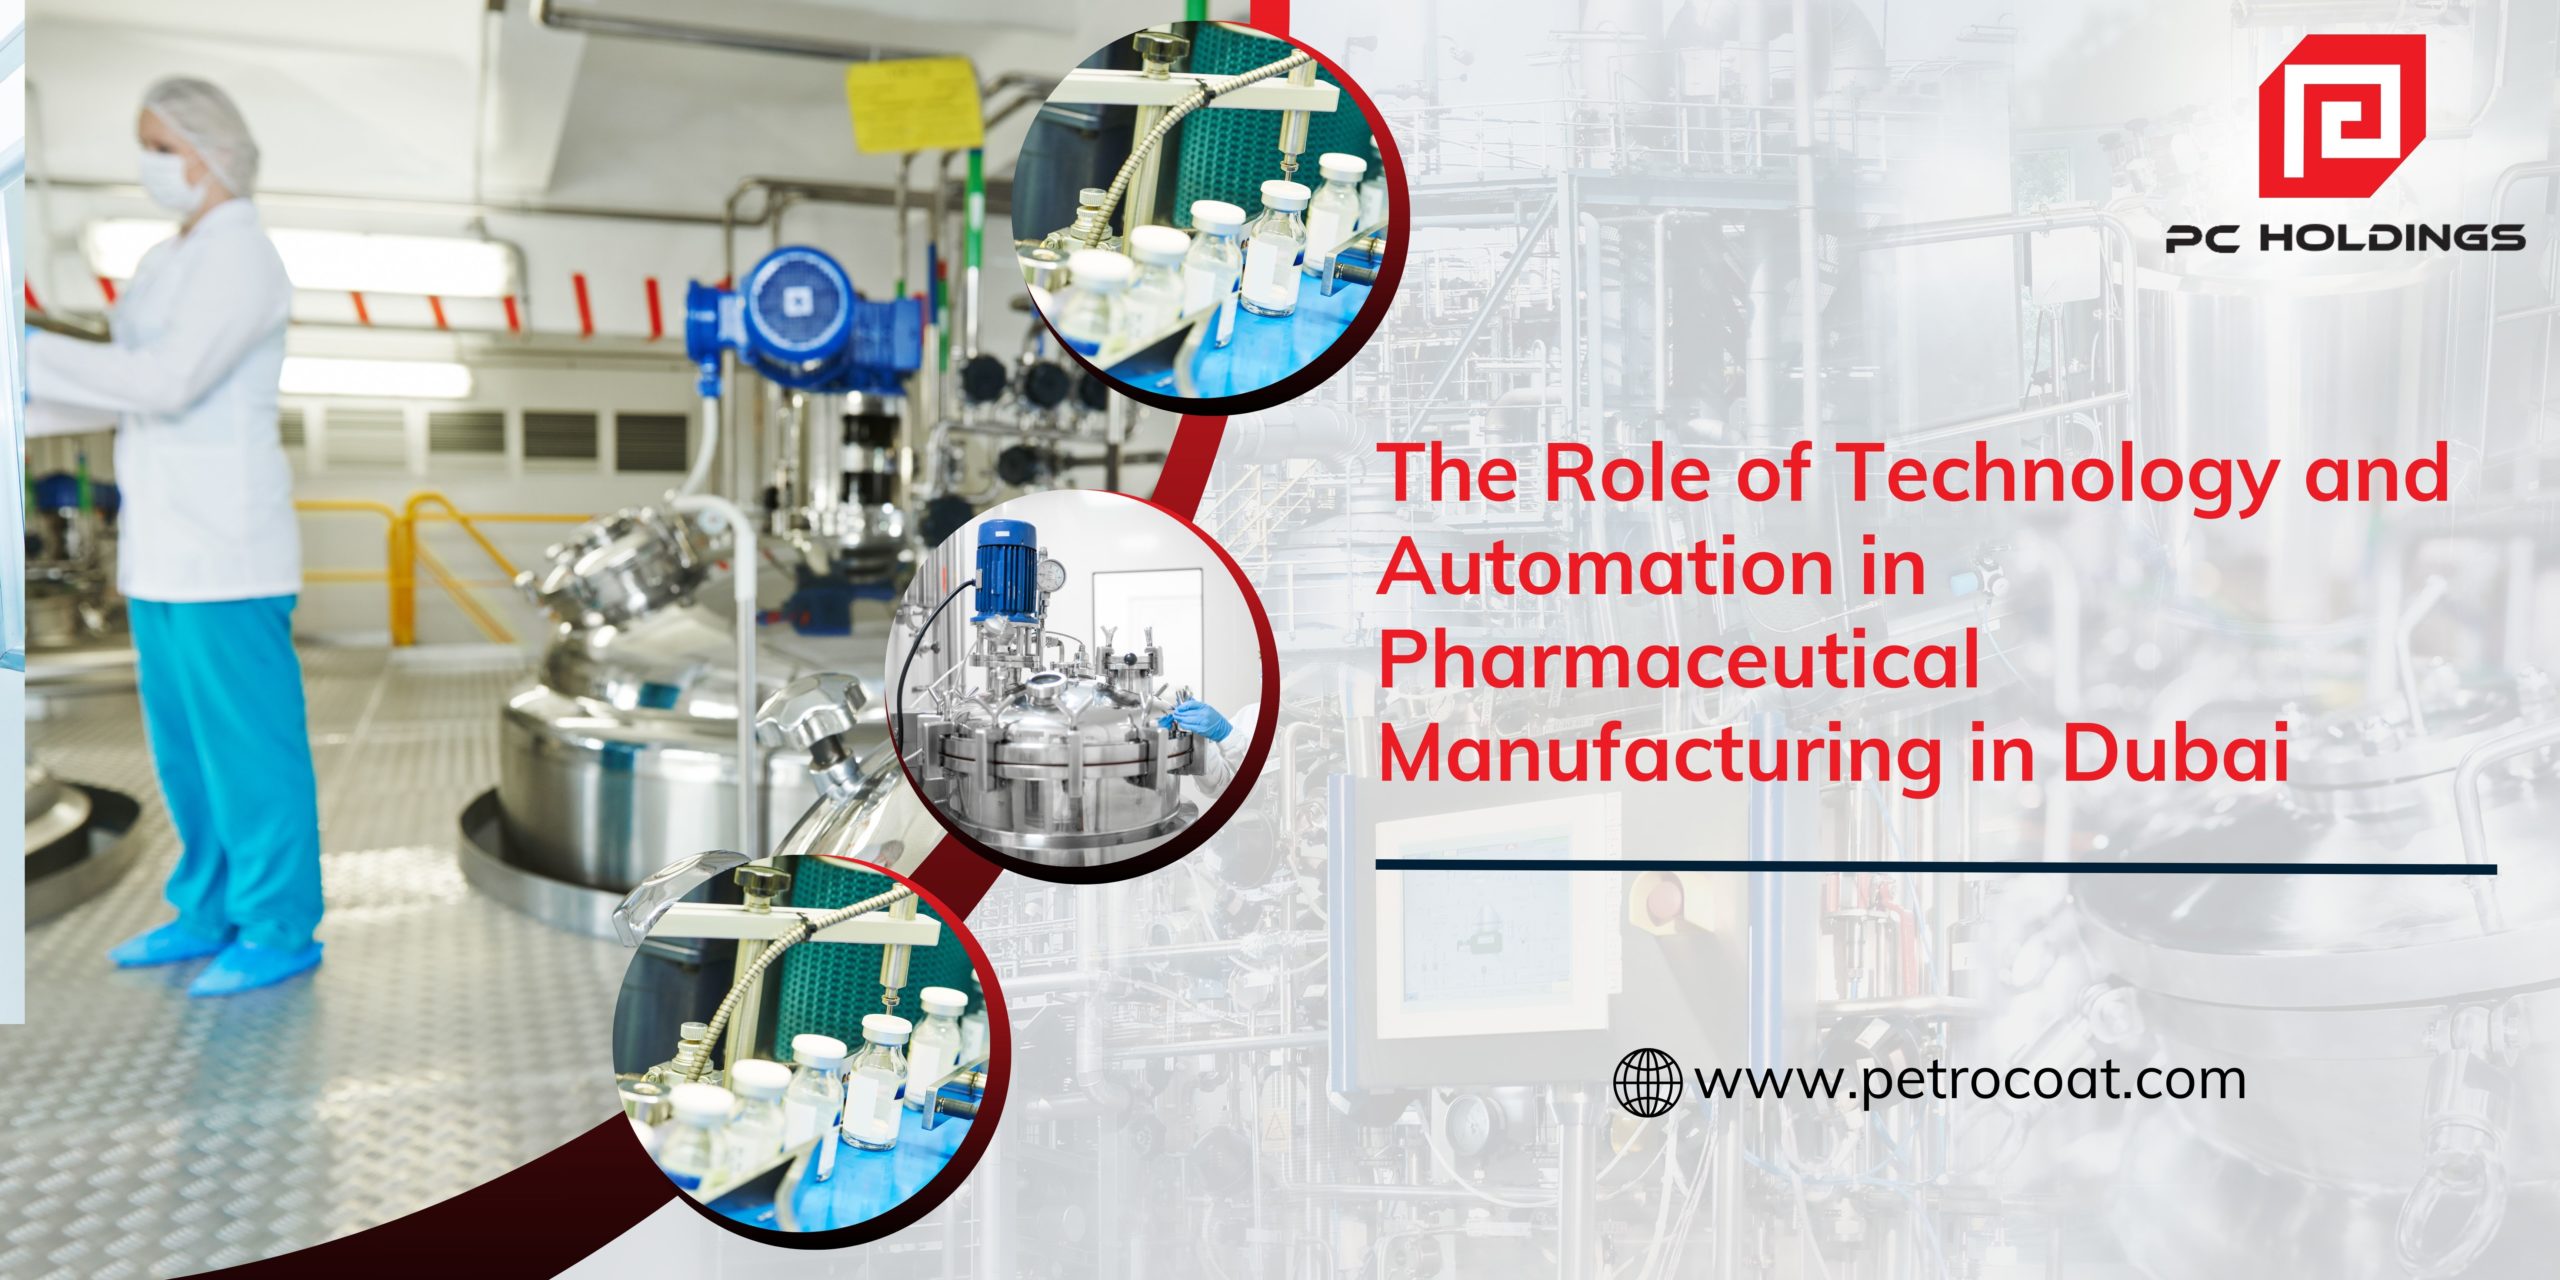 The Role of Technology and Automation in Pharmaceutical Manufacturing in Dubai